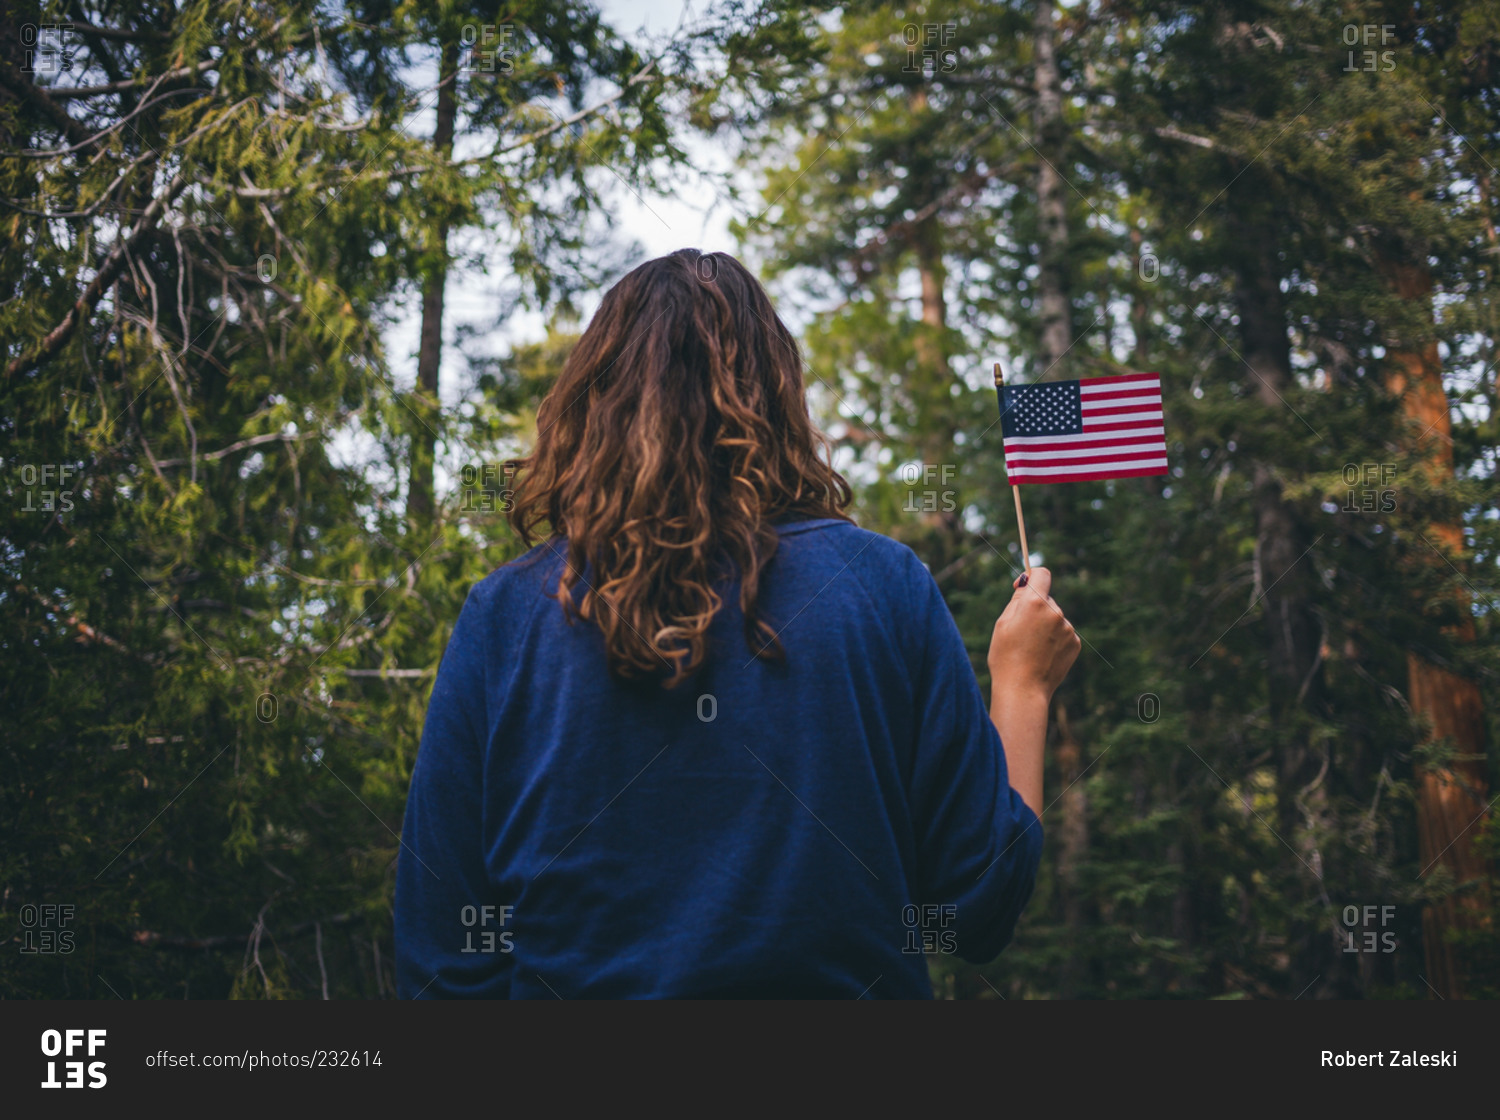 Woman in forest holding an American flag